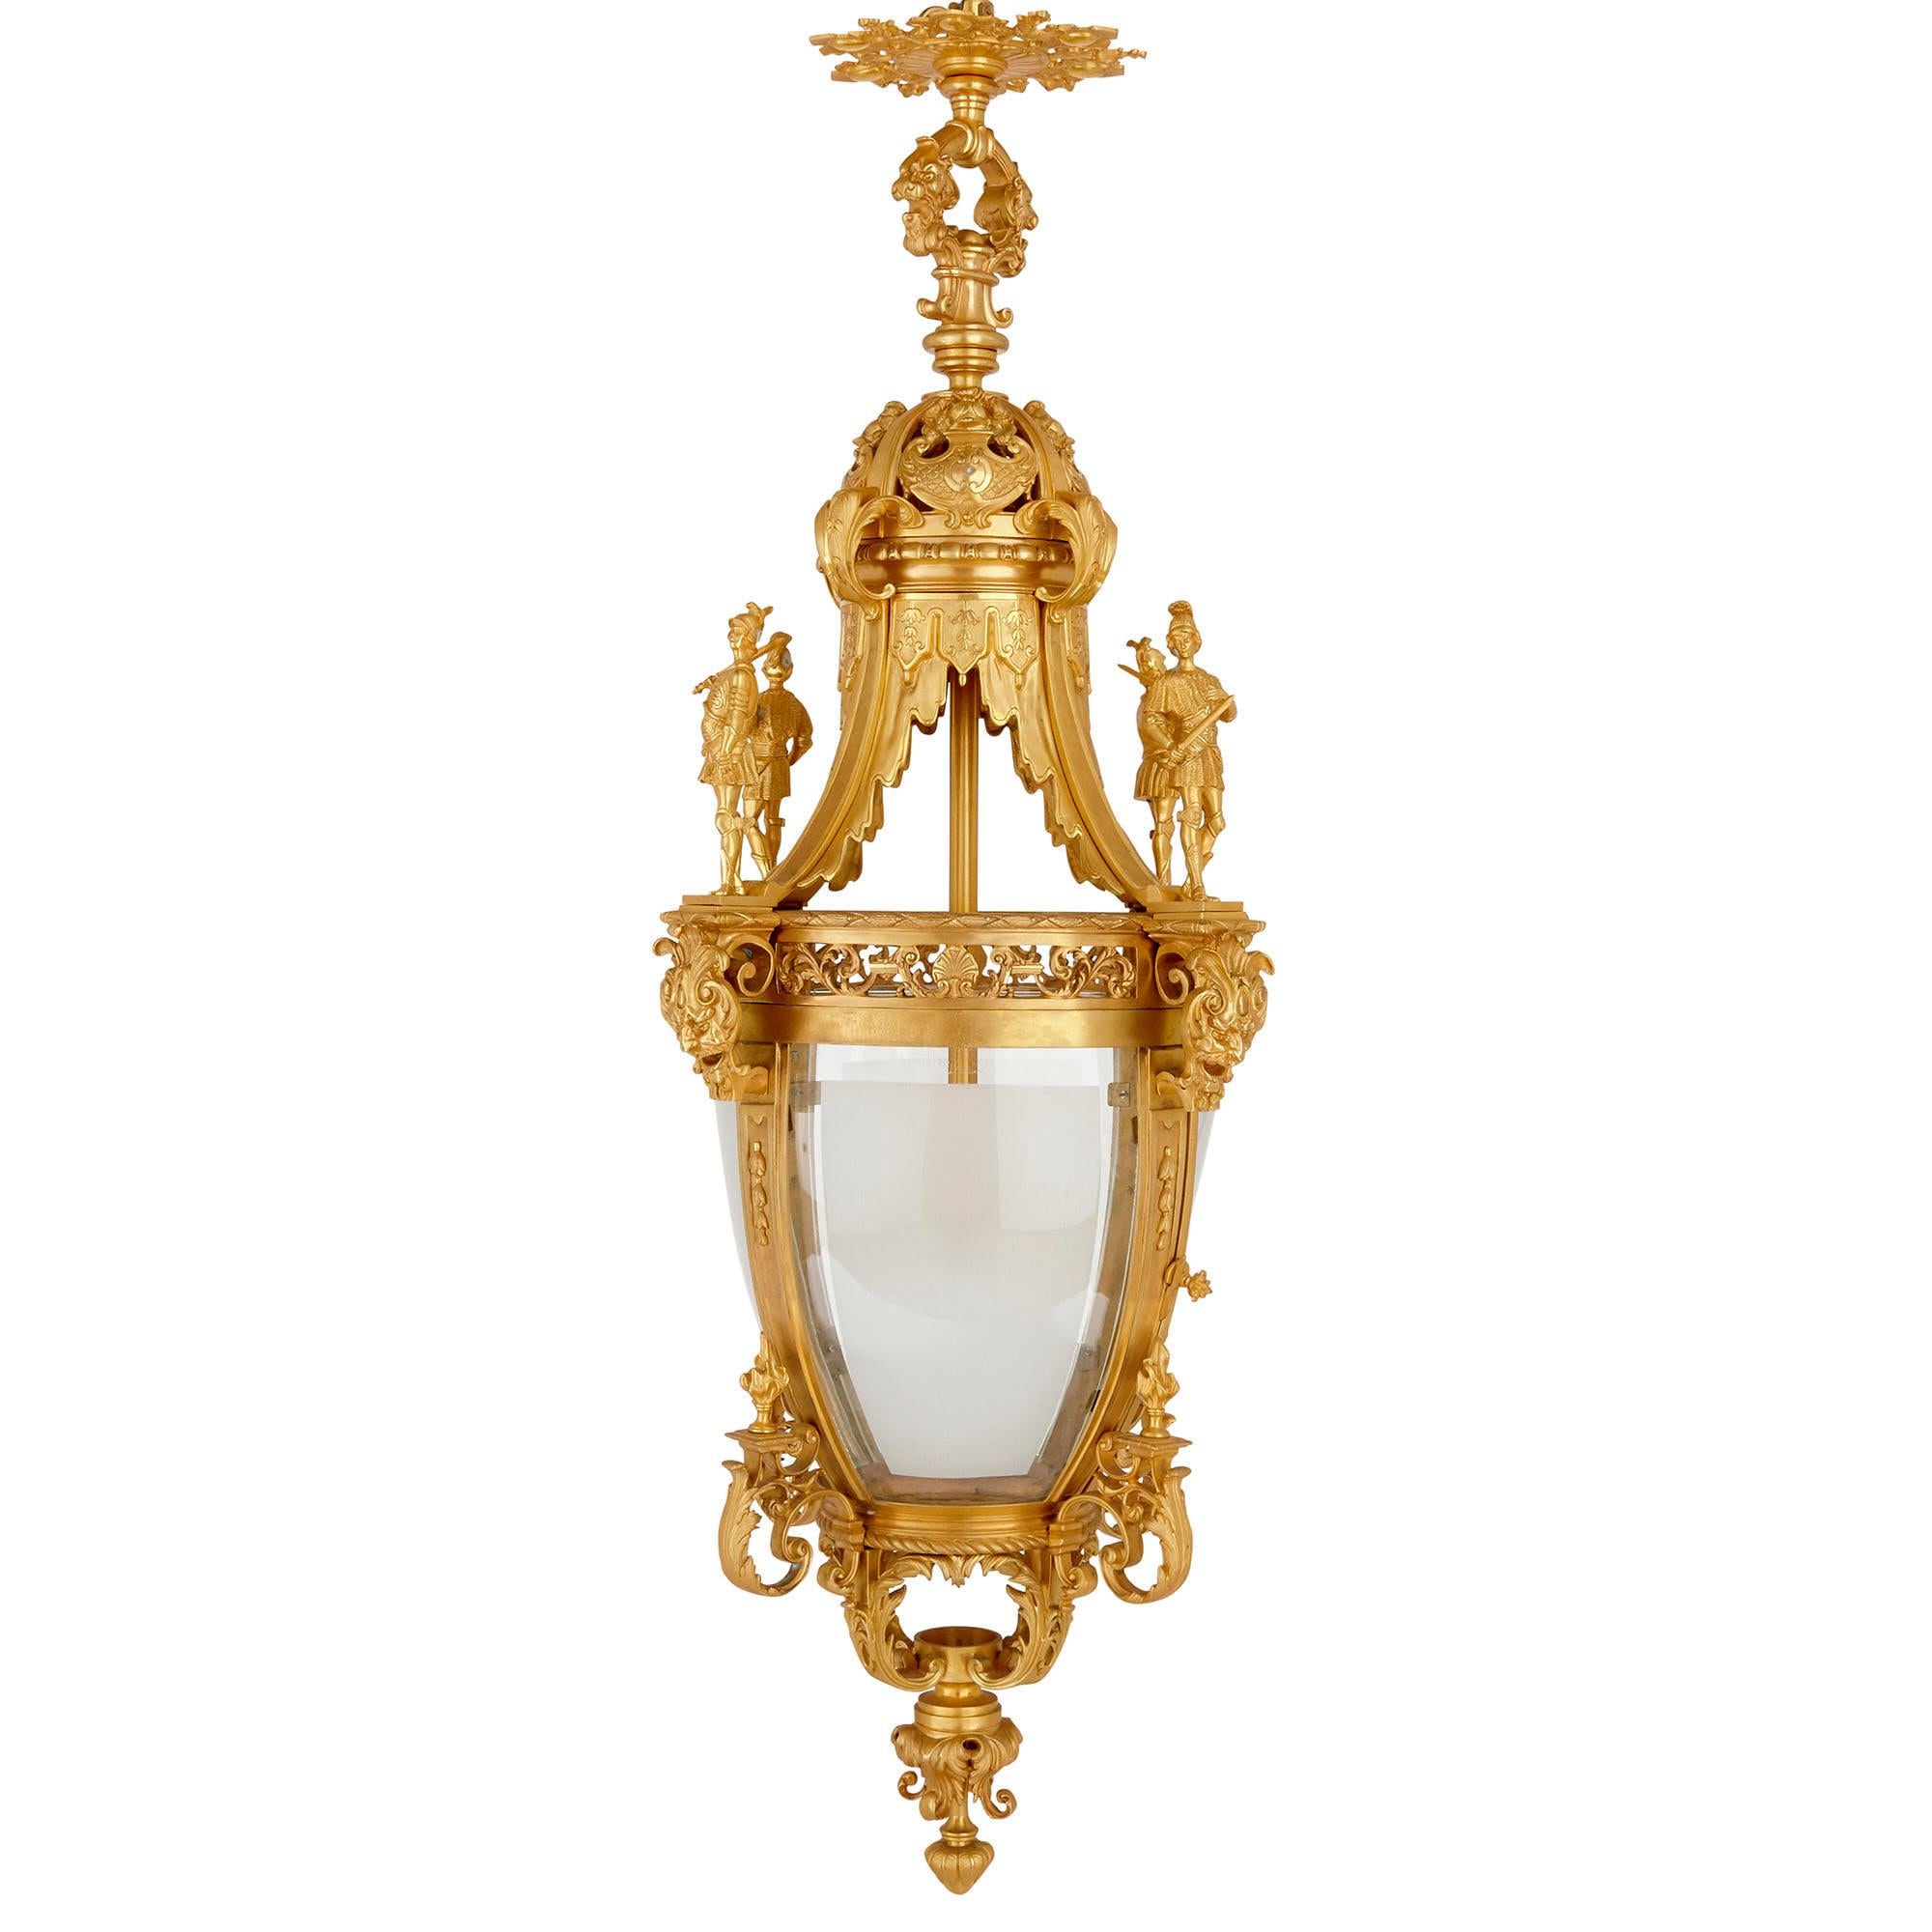 Very large Louis XV style gilt bronze lantern
French, 20th century
Dimensions: Height 160cm, diameter 62cm

This magnificent lantern is crafted from gilt bronze in a wonderfully ornate decorative style. The lantern features a lightbox comprised